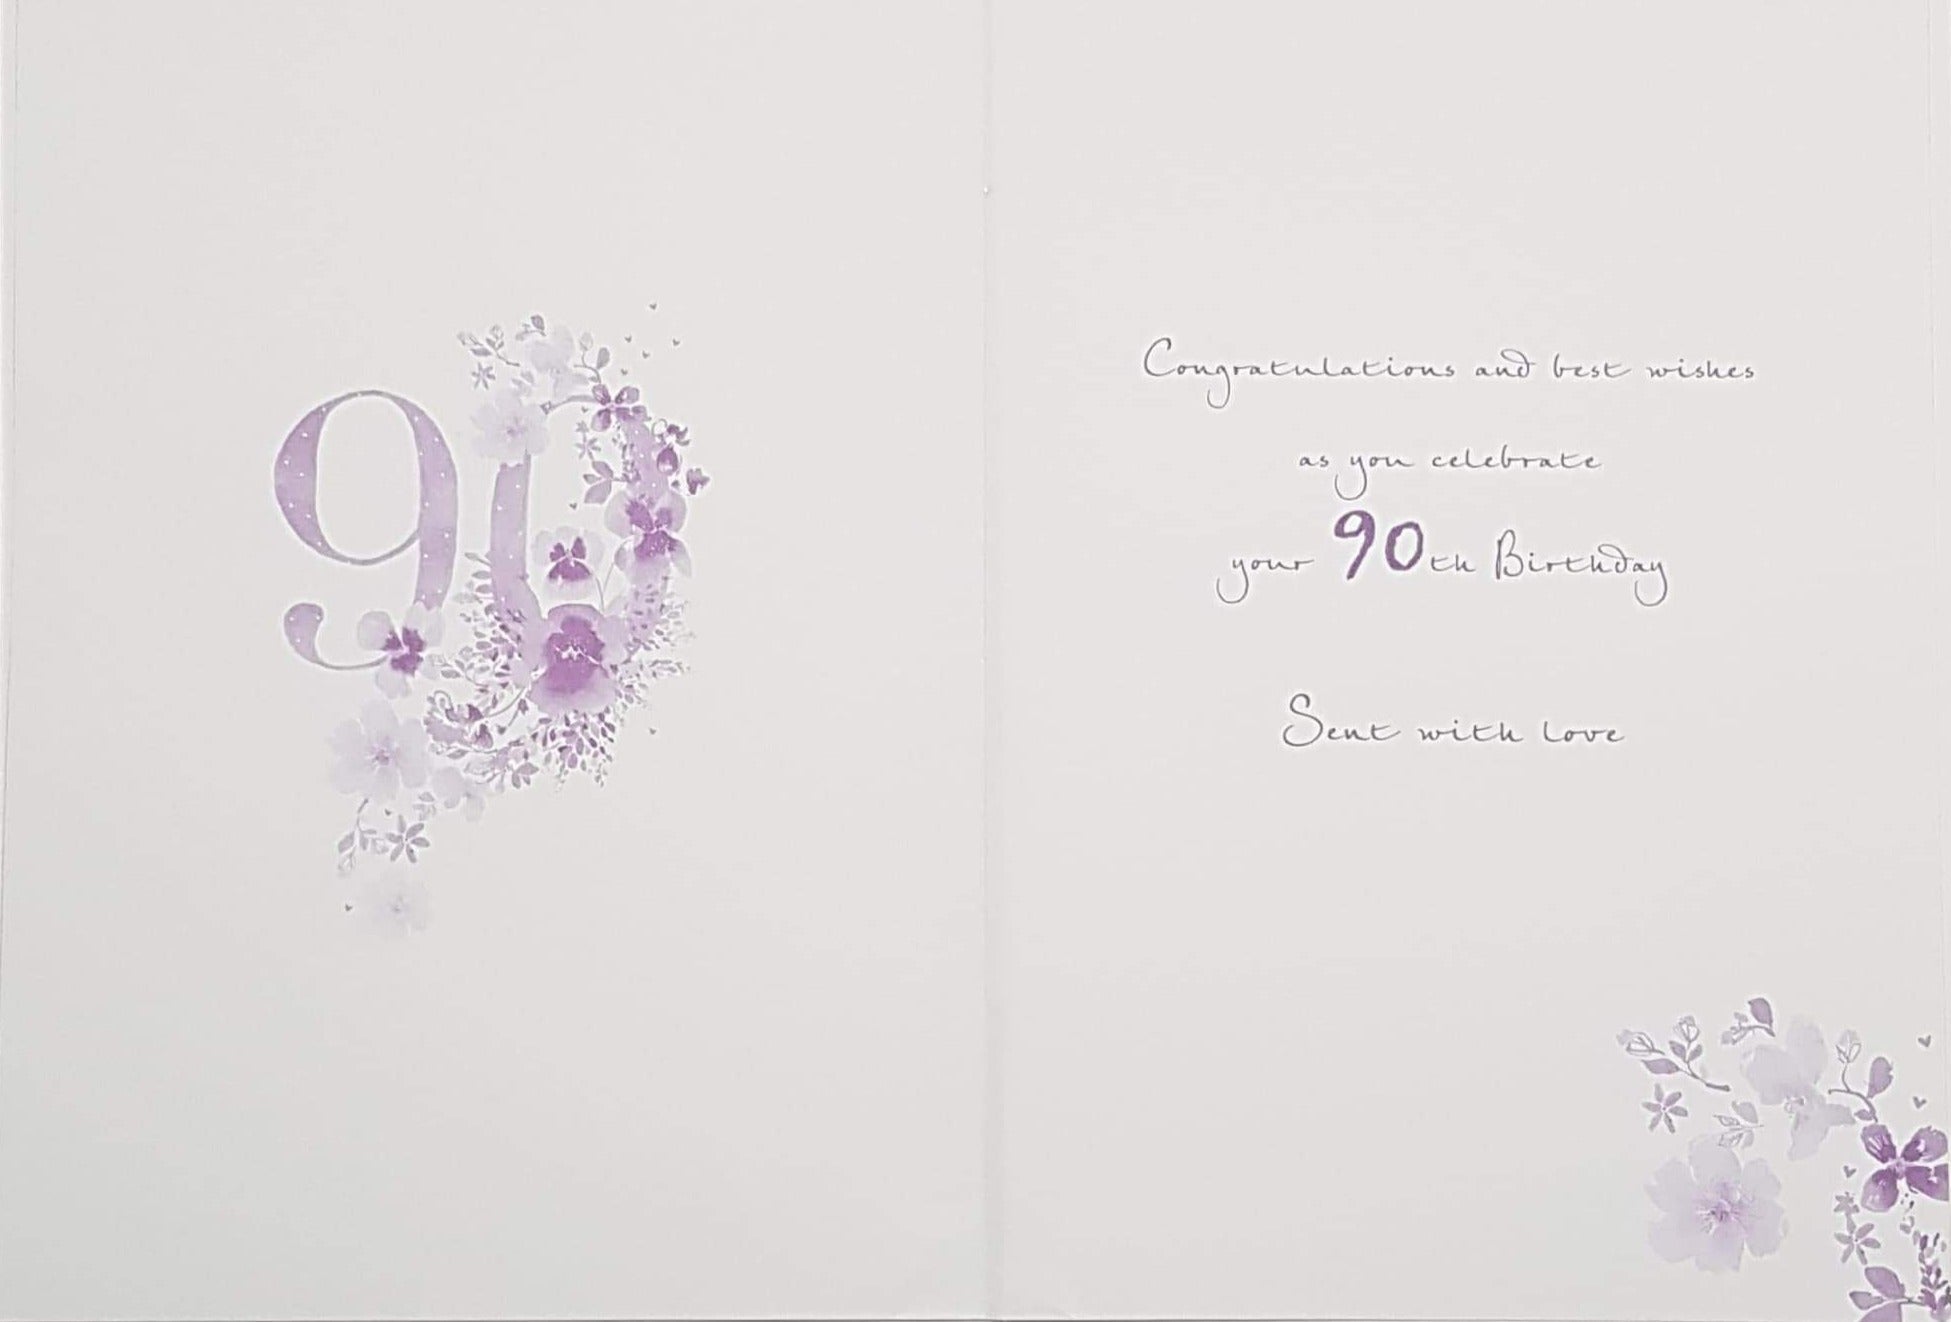 Age 90  Birthday Card - Big Purple Number '90' With Floral Decorations